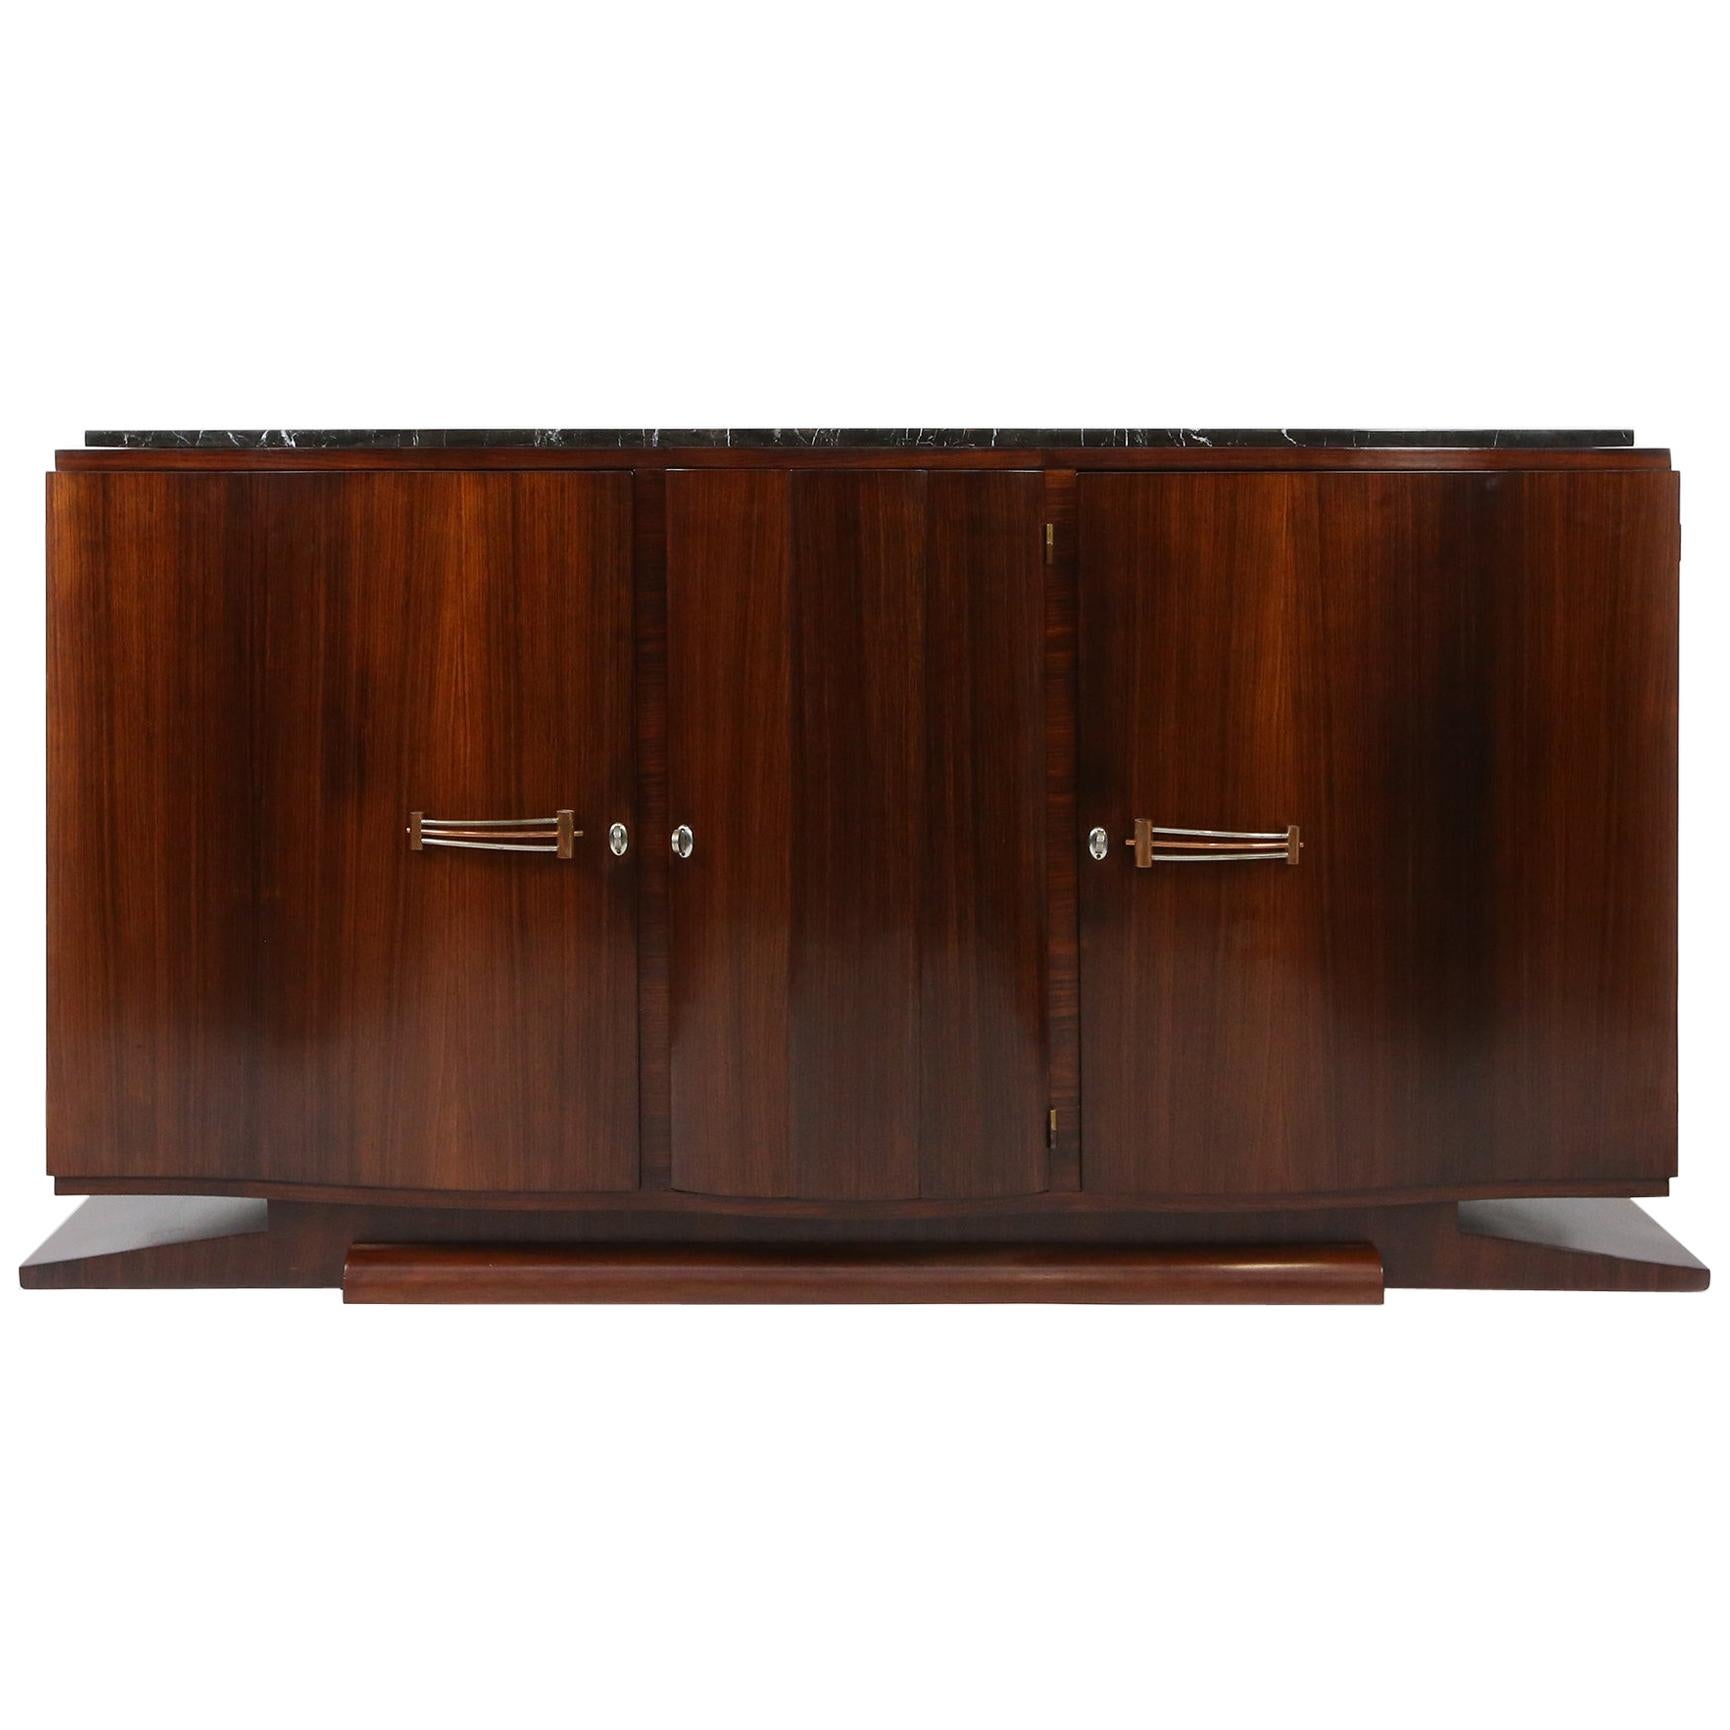 Art-Deco Walnut and Black Marble Sideboard from De Coene Frères, Belgium 1930s For Sale